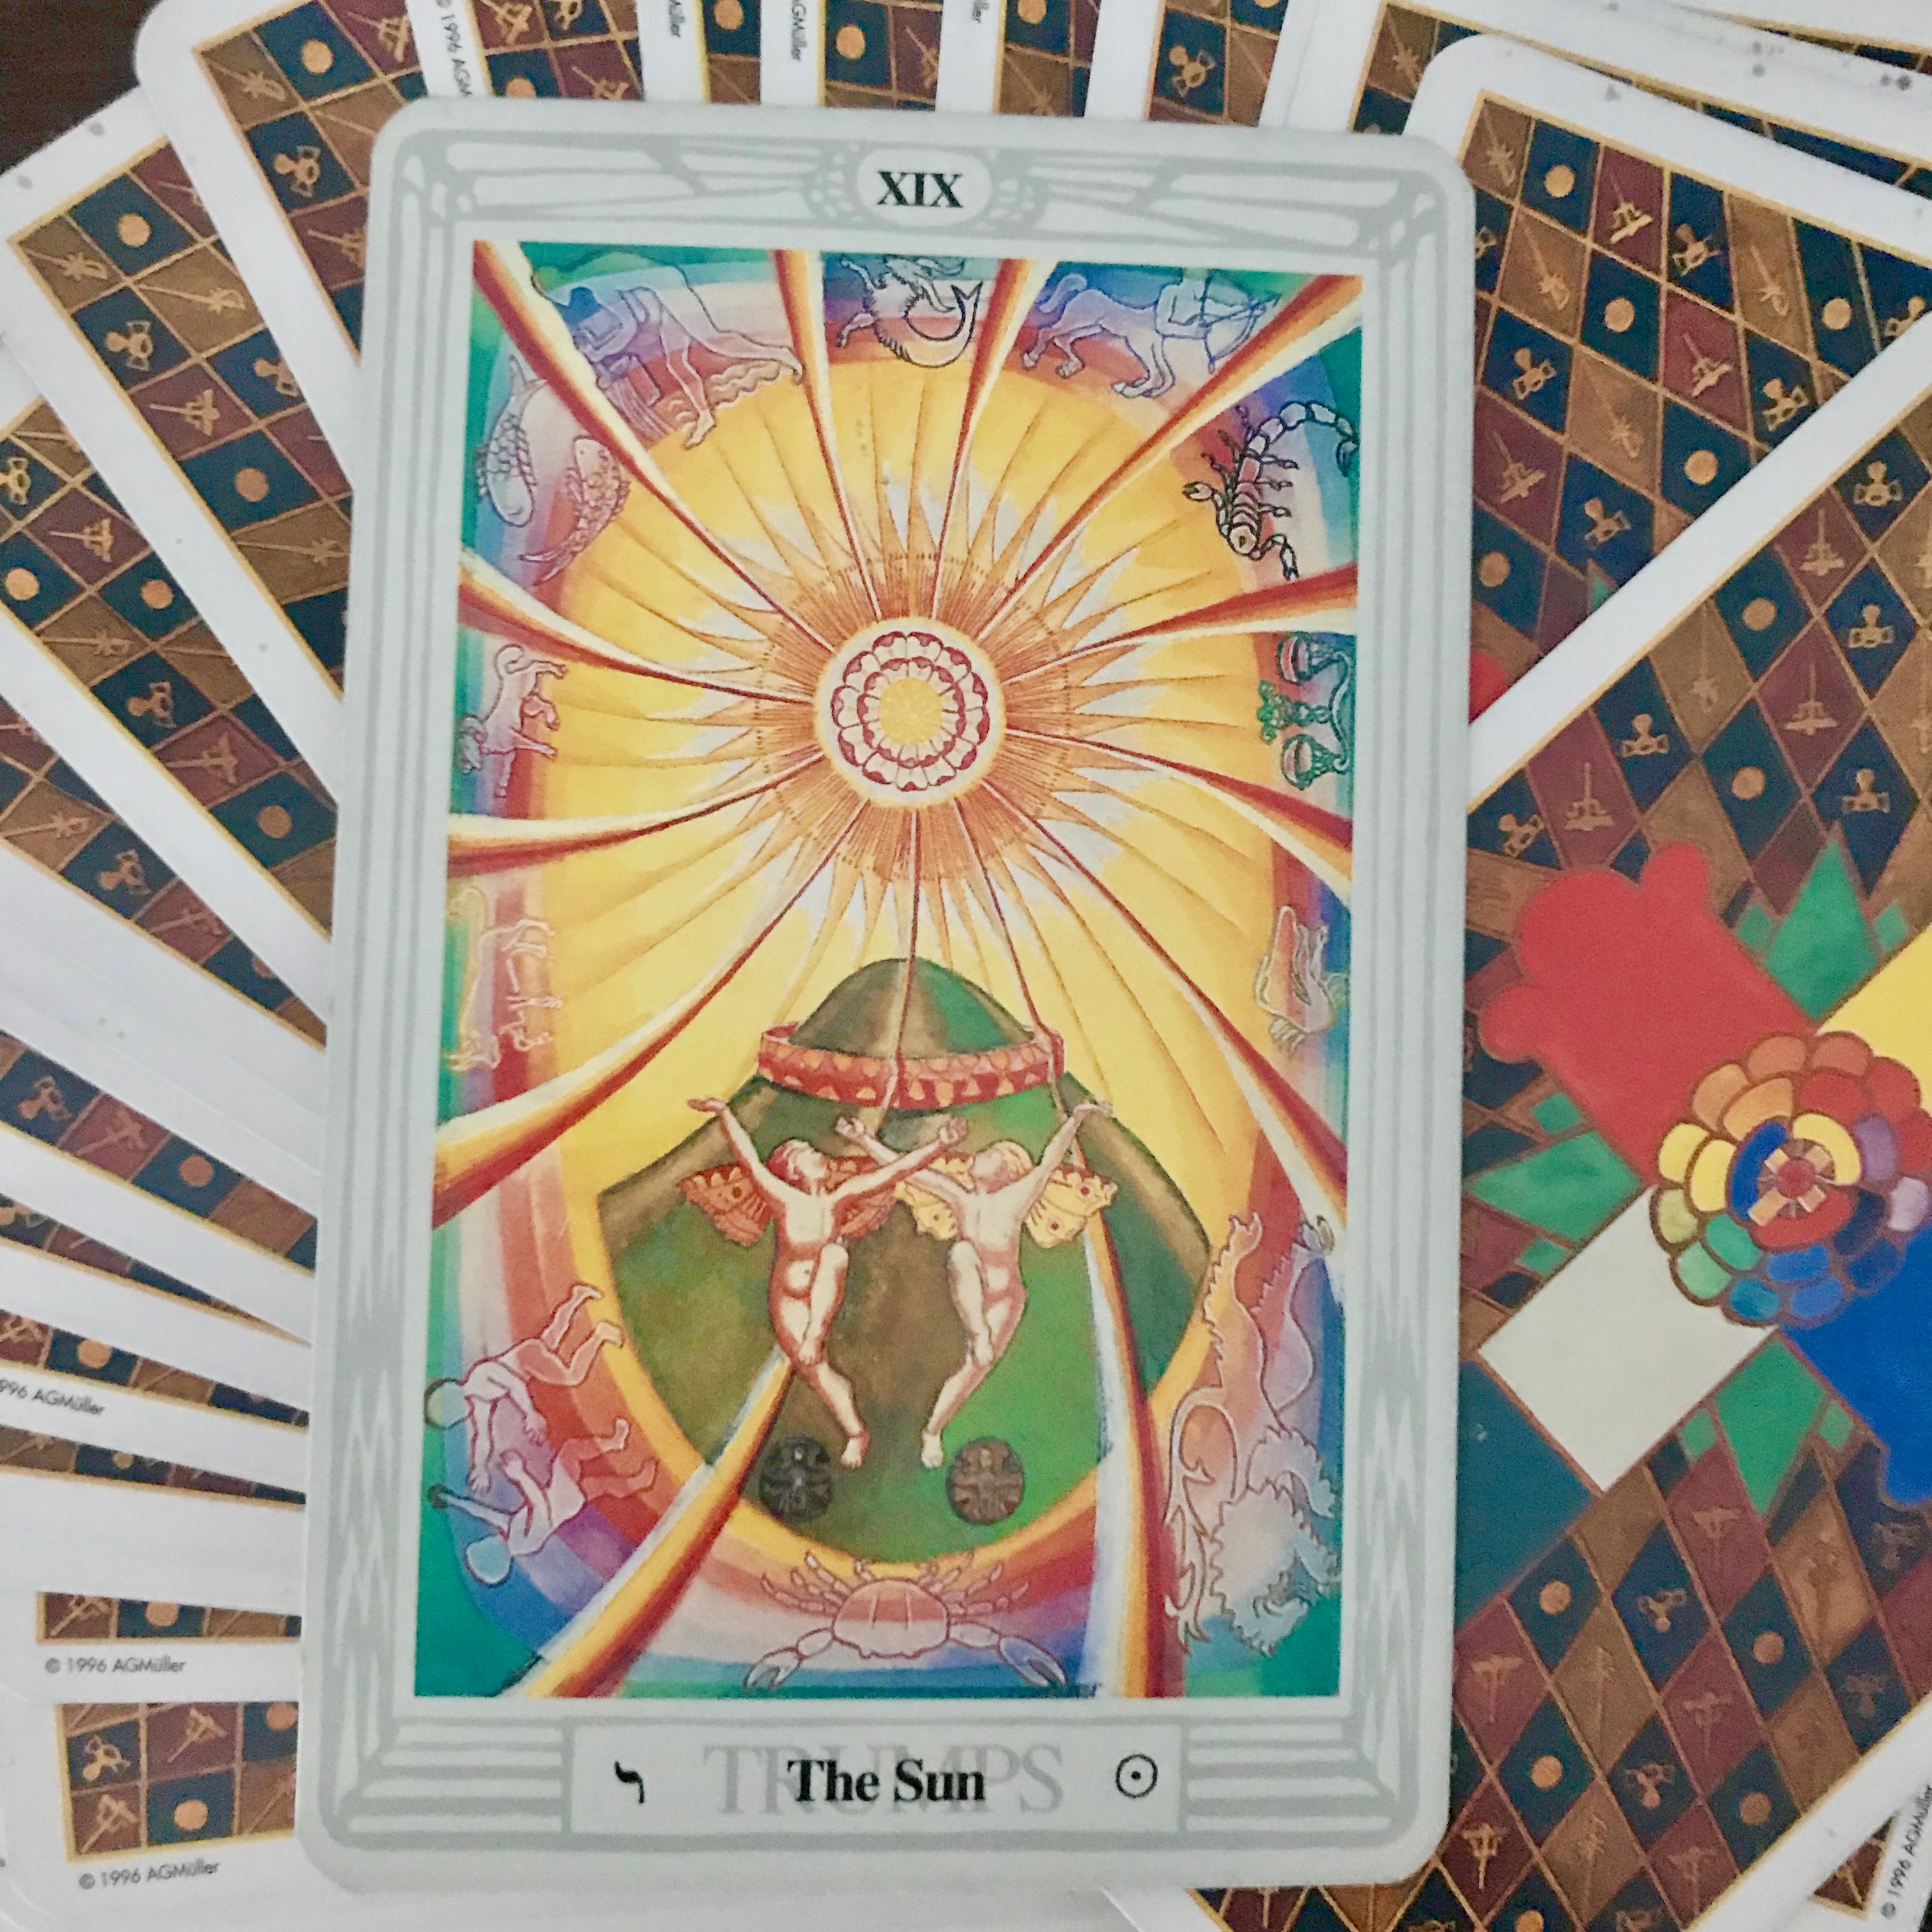 This card is from a Thoth Tarot Card deck and depicts the major arcana SUN.  The colors are bright yellow with optimistic red ribbons reaching out to the border with angels dancing, arms up, looking toward the central sun. 